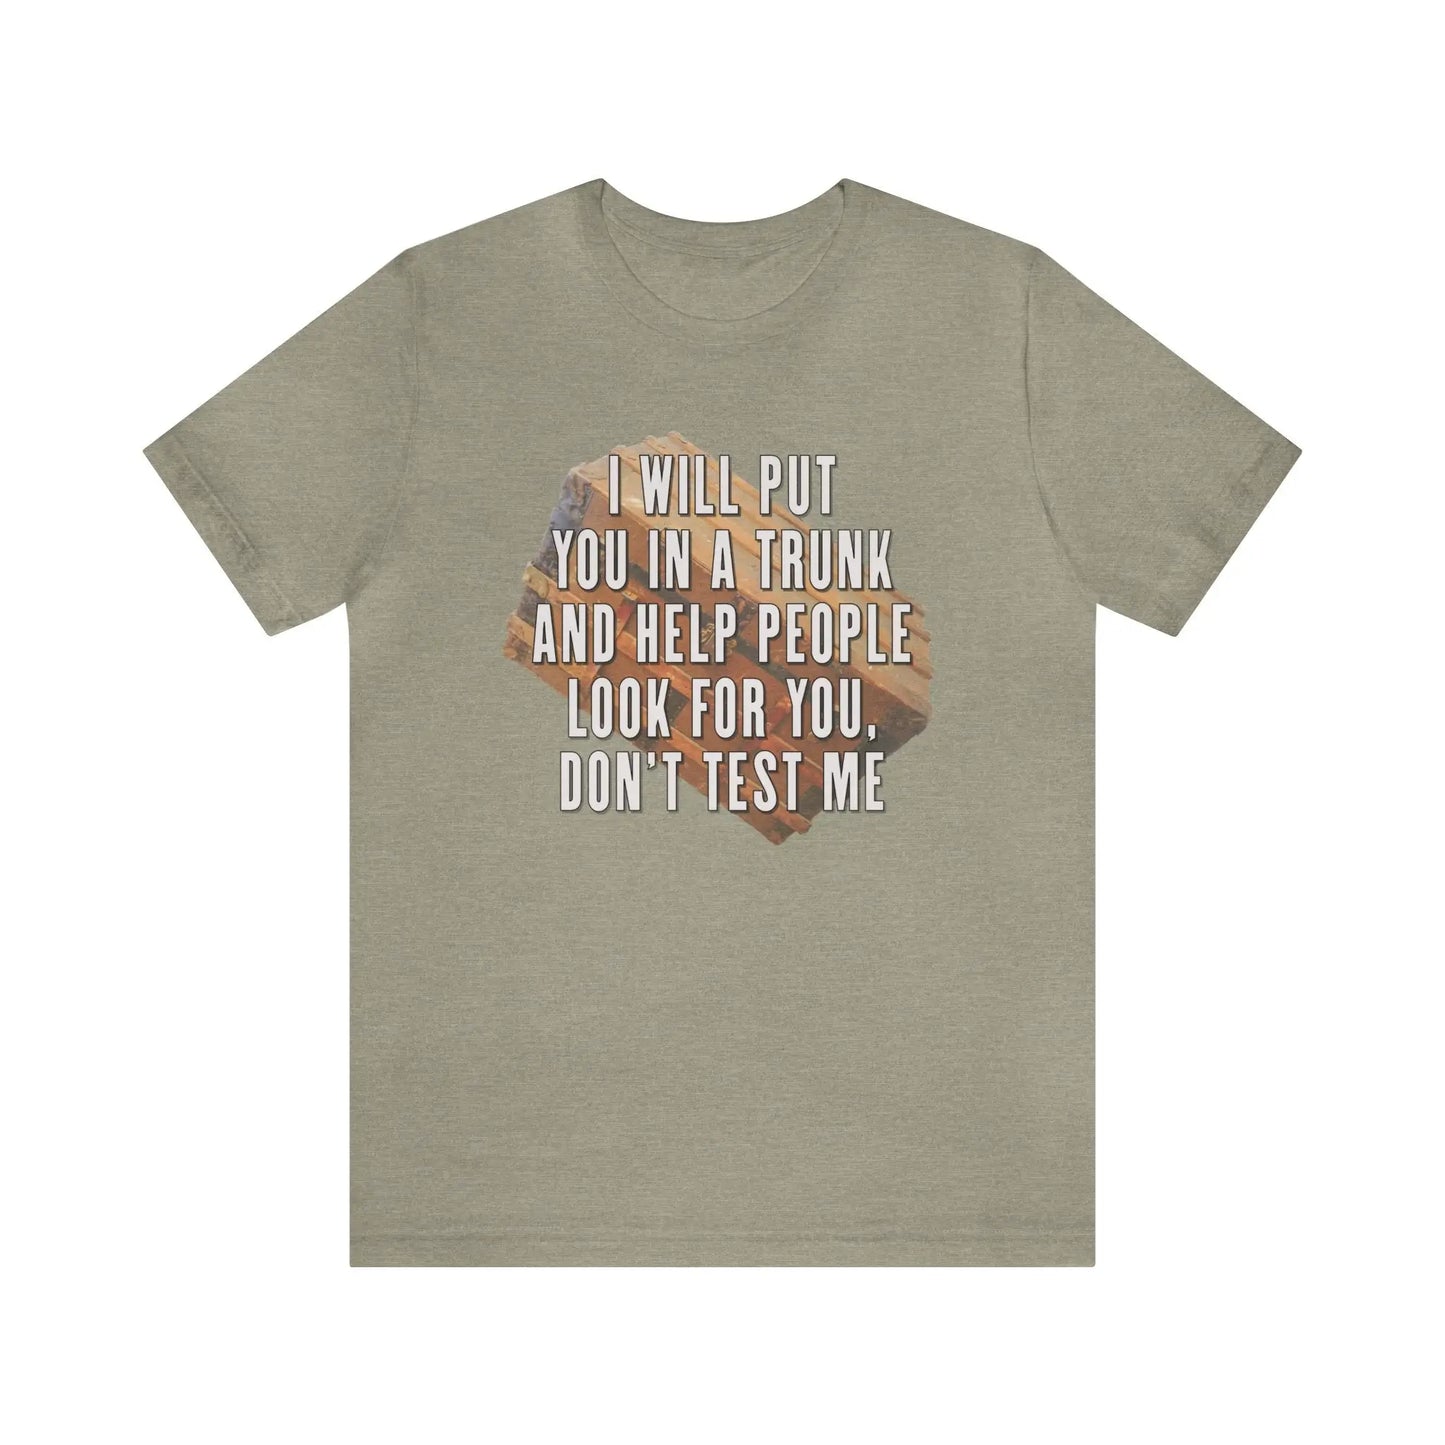 Put You In A Trunk Men's Short Sleeve Tee - Wicked Tees